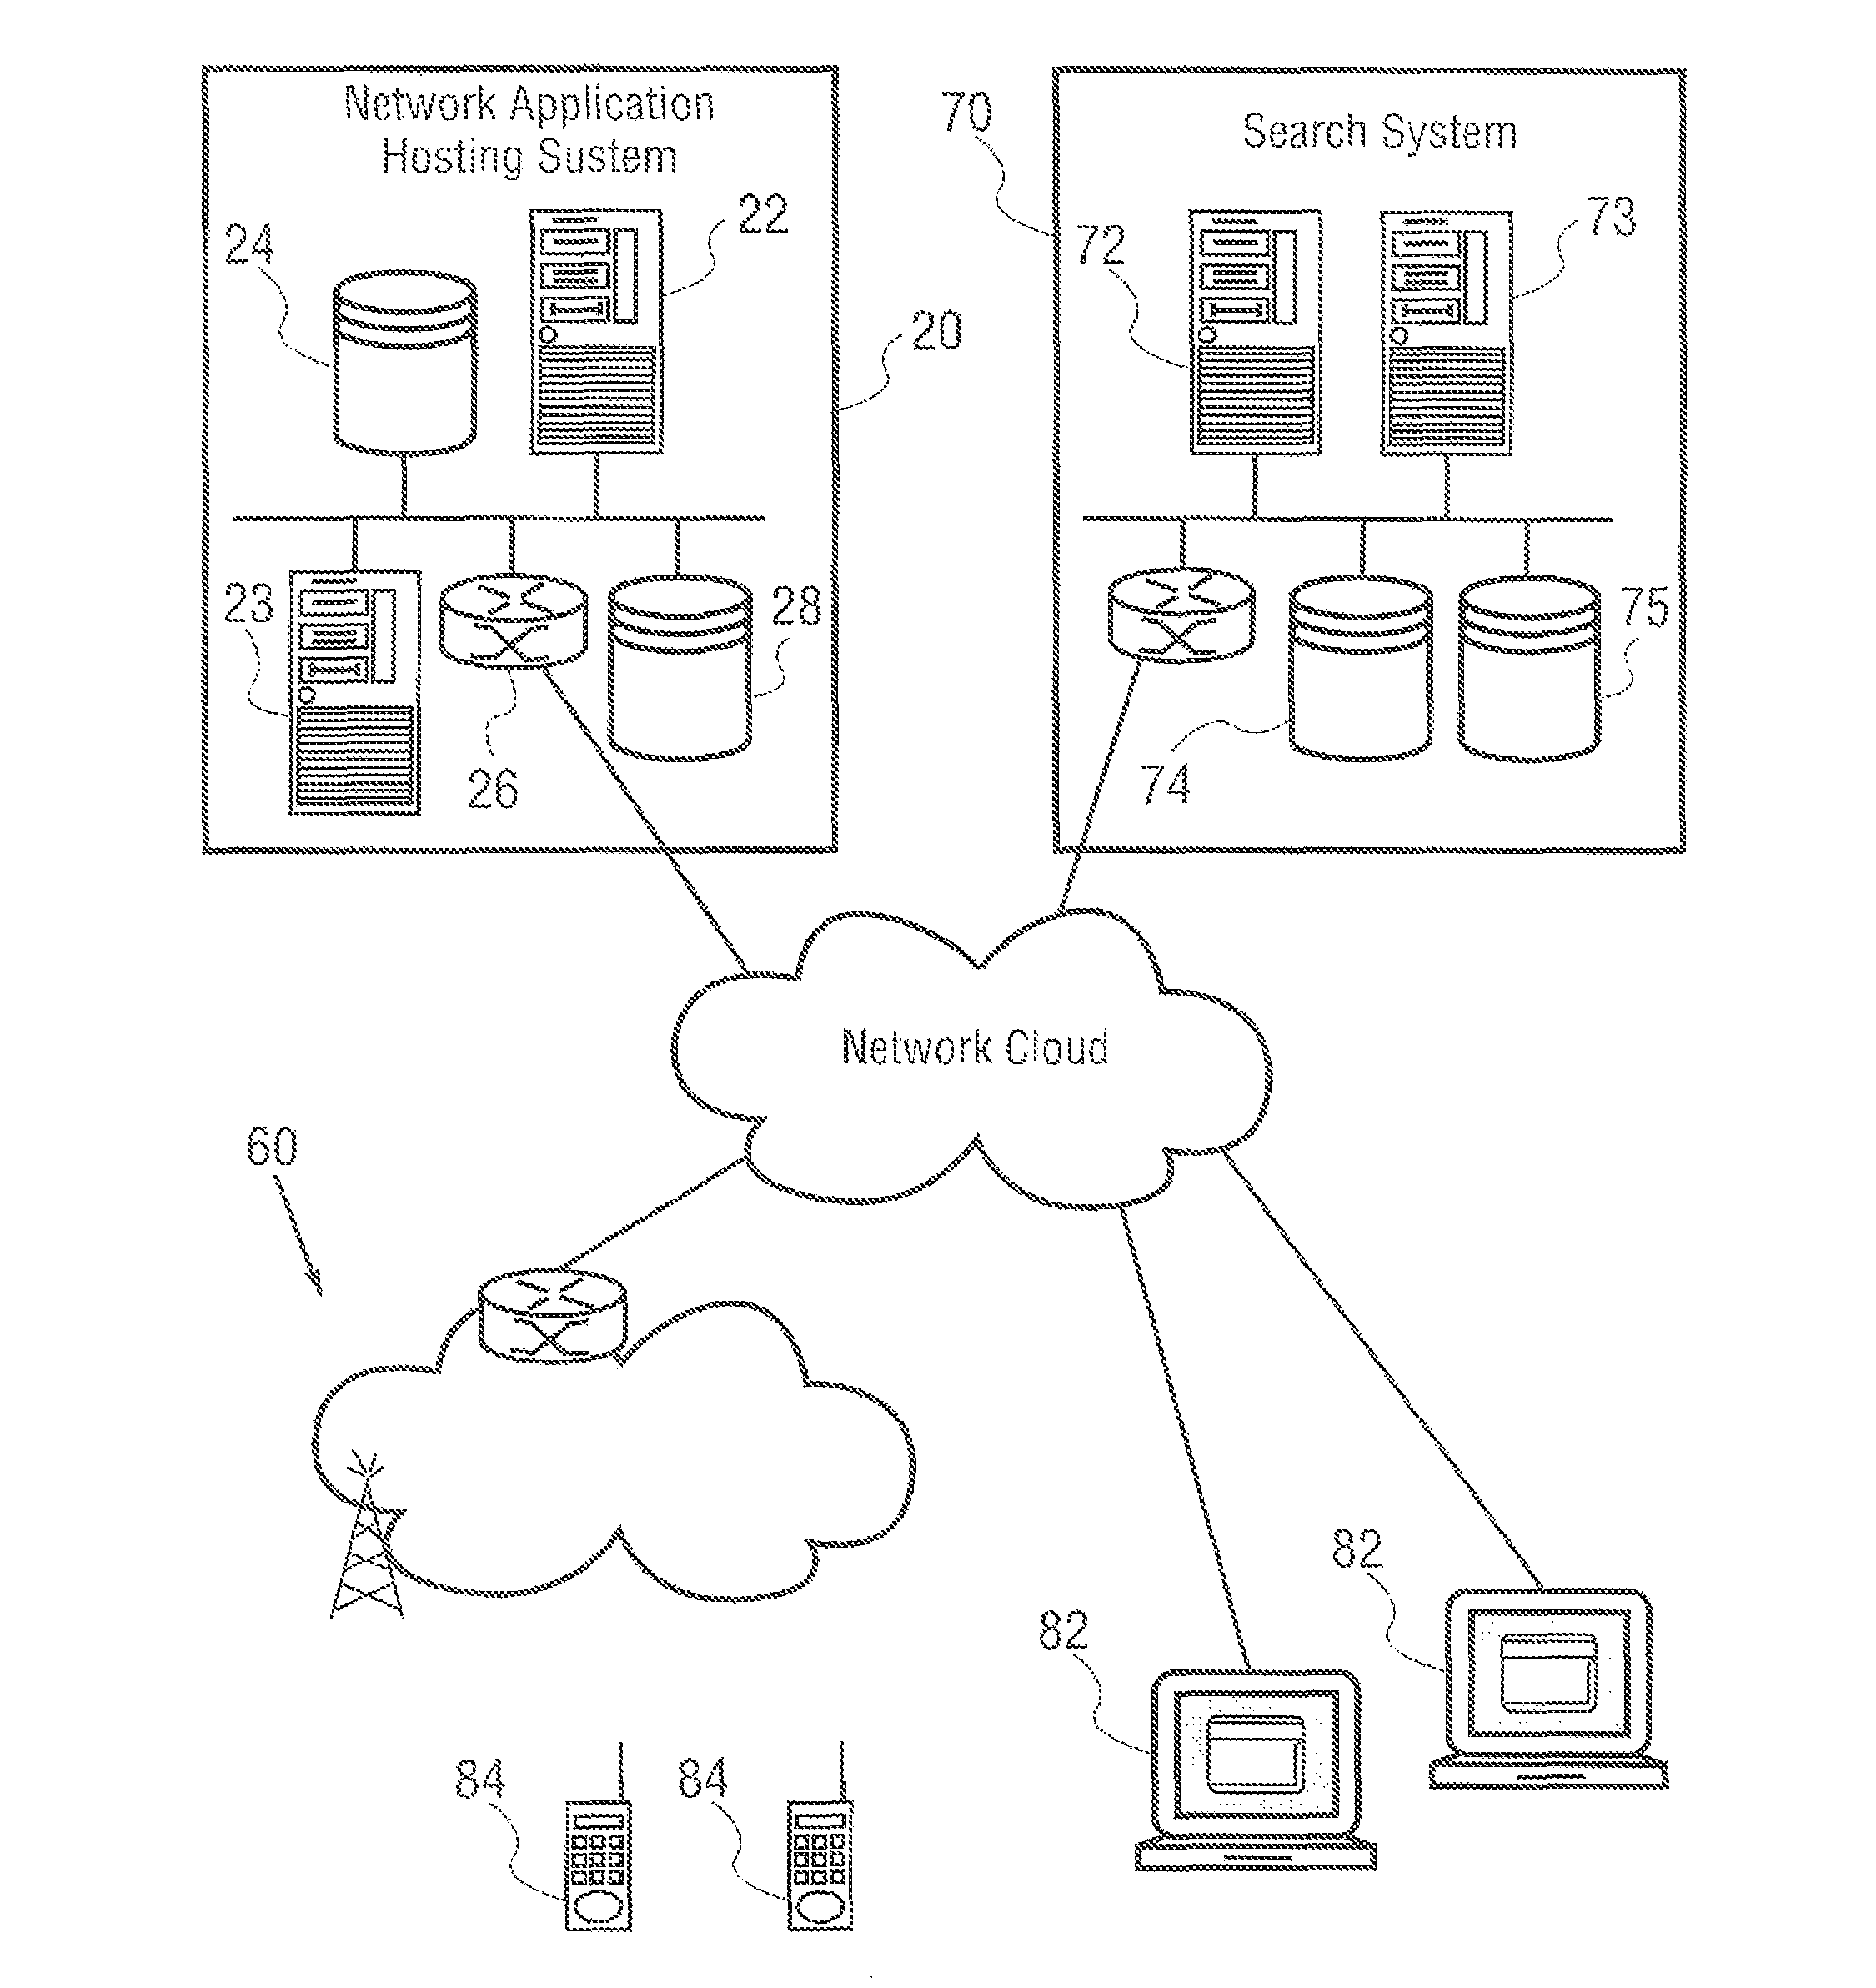 Traffic predictor for network-accessible information modules